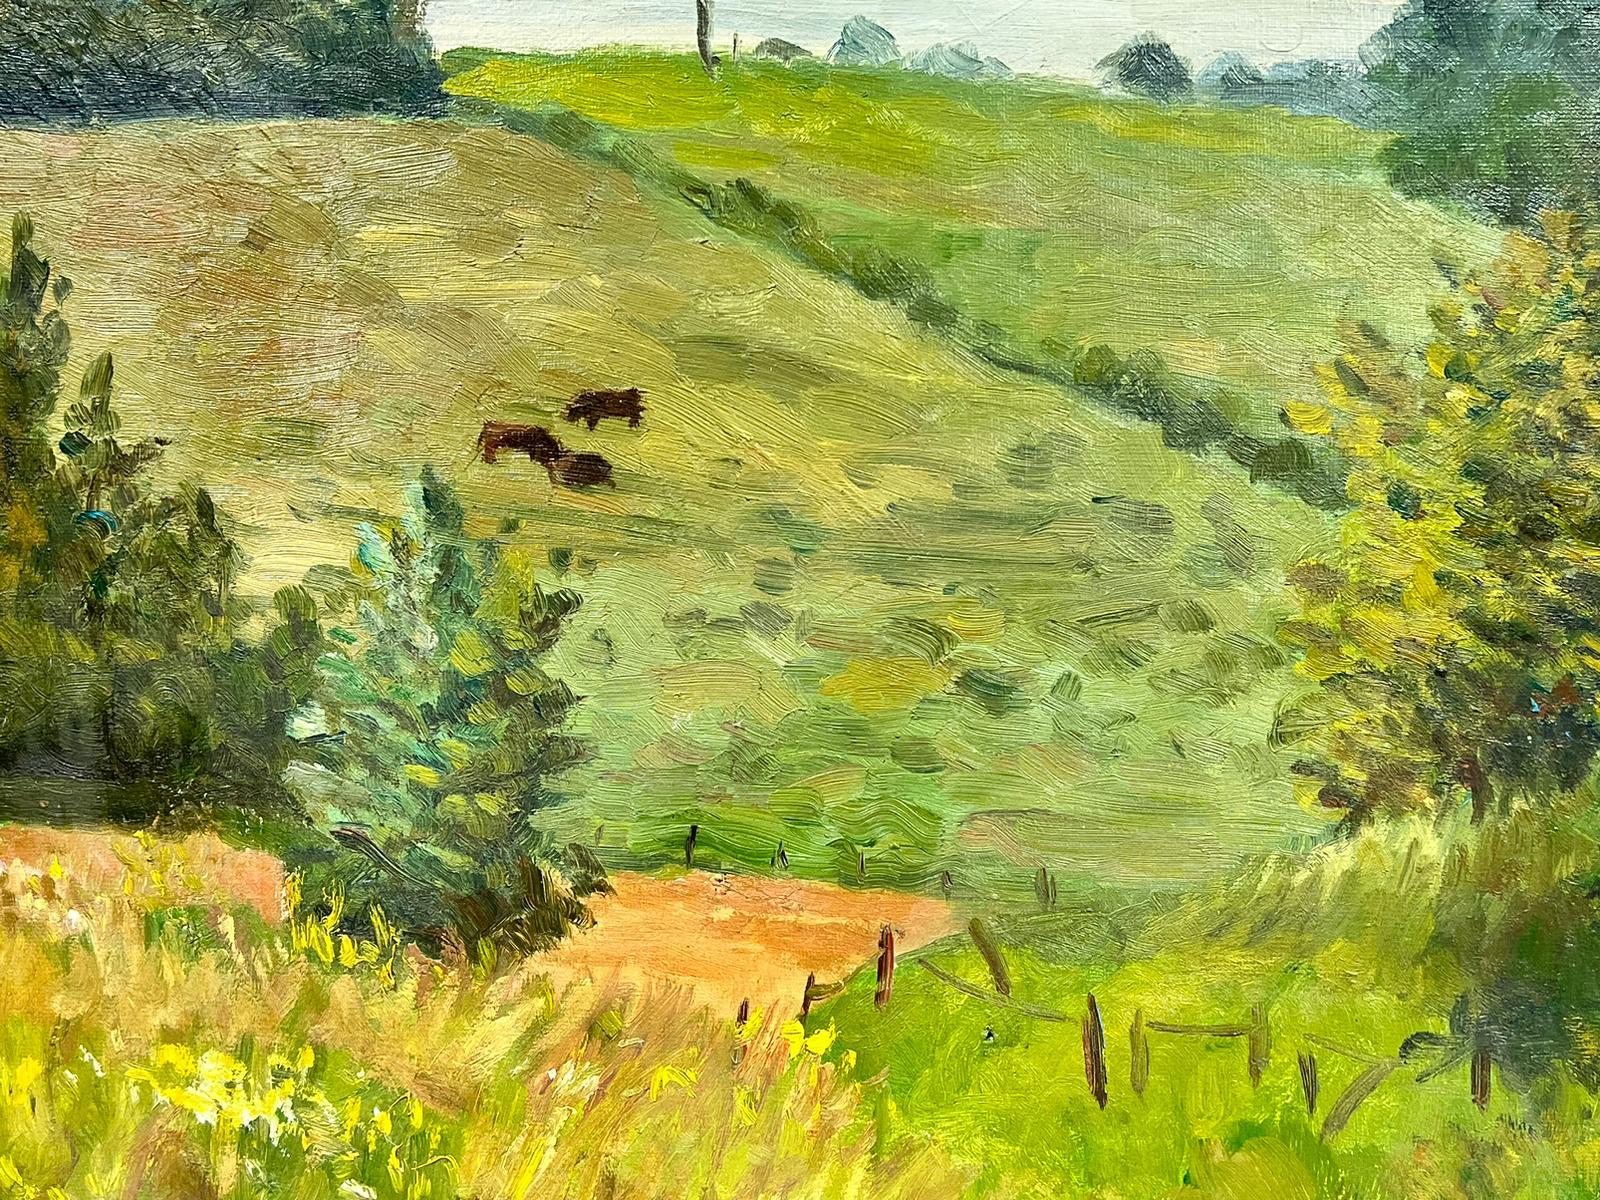 Tranquil Pastures
by Josine Vignon (French 1922-2022) 
signed and stamped verso
oil painting on canvas, unframed
canvas: 18 x 22 inches
very good condition
provenance: from the artists estate, France

Josine Vignon (1922-2022) was a French artist